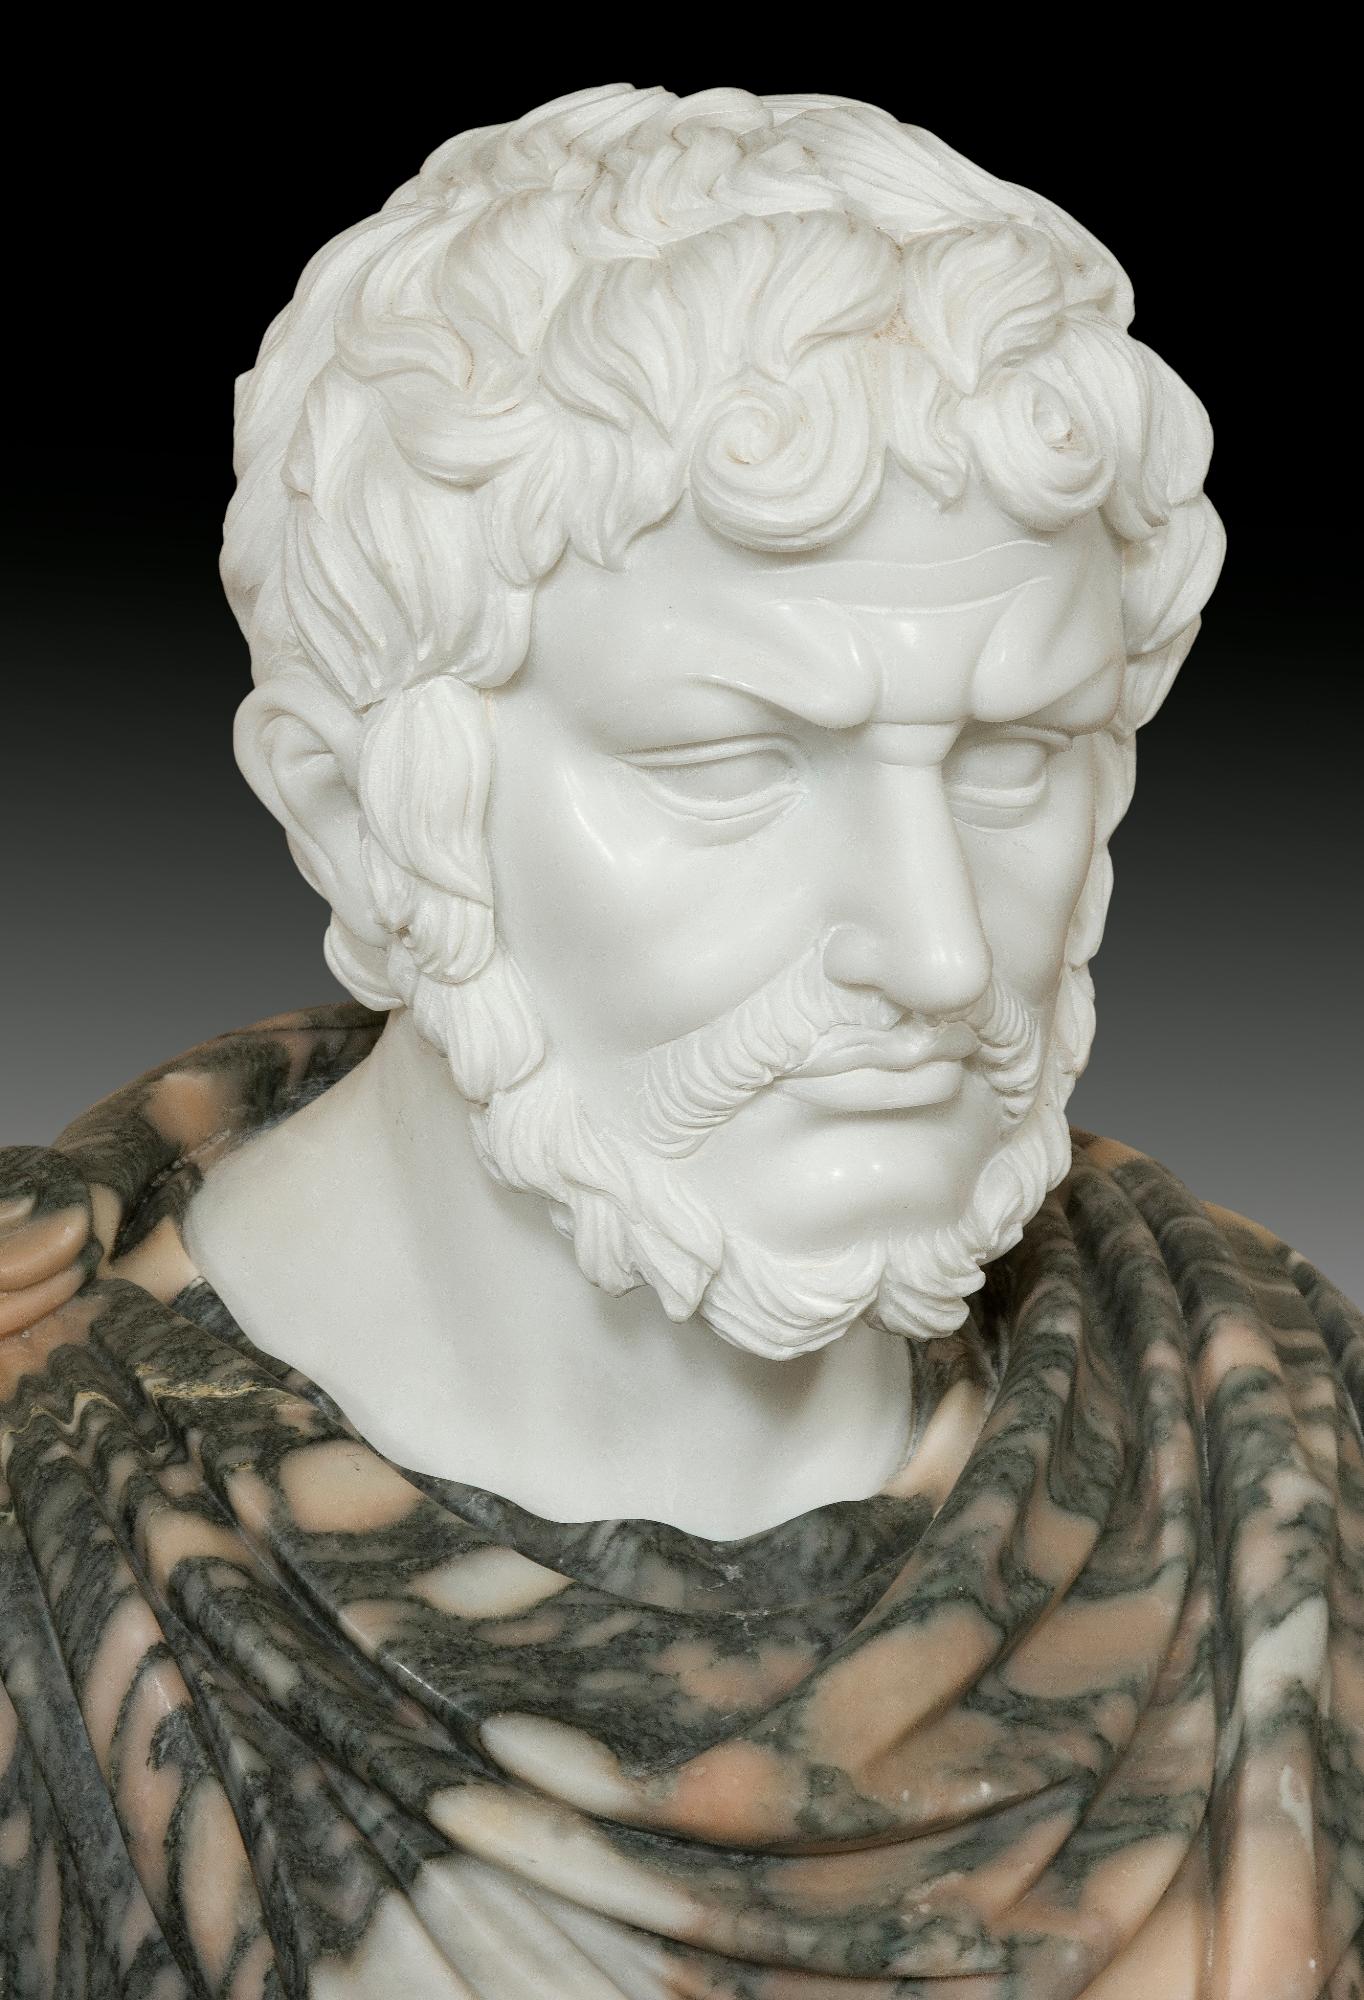 The idealisation of the face of the man toothed, extracted from Roman models related to the Greek Hellenism, does not allow to identify it but you can see similarities with portraits like those of Caracalla (towards the beginning of Century III dC).